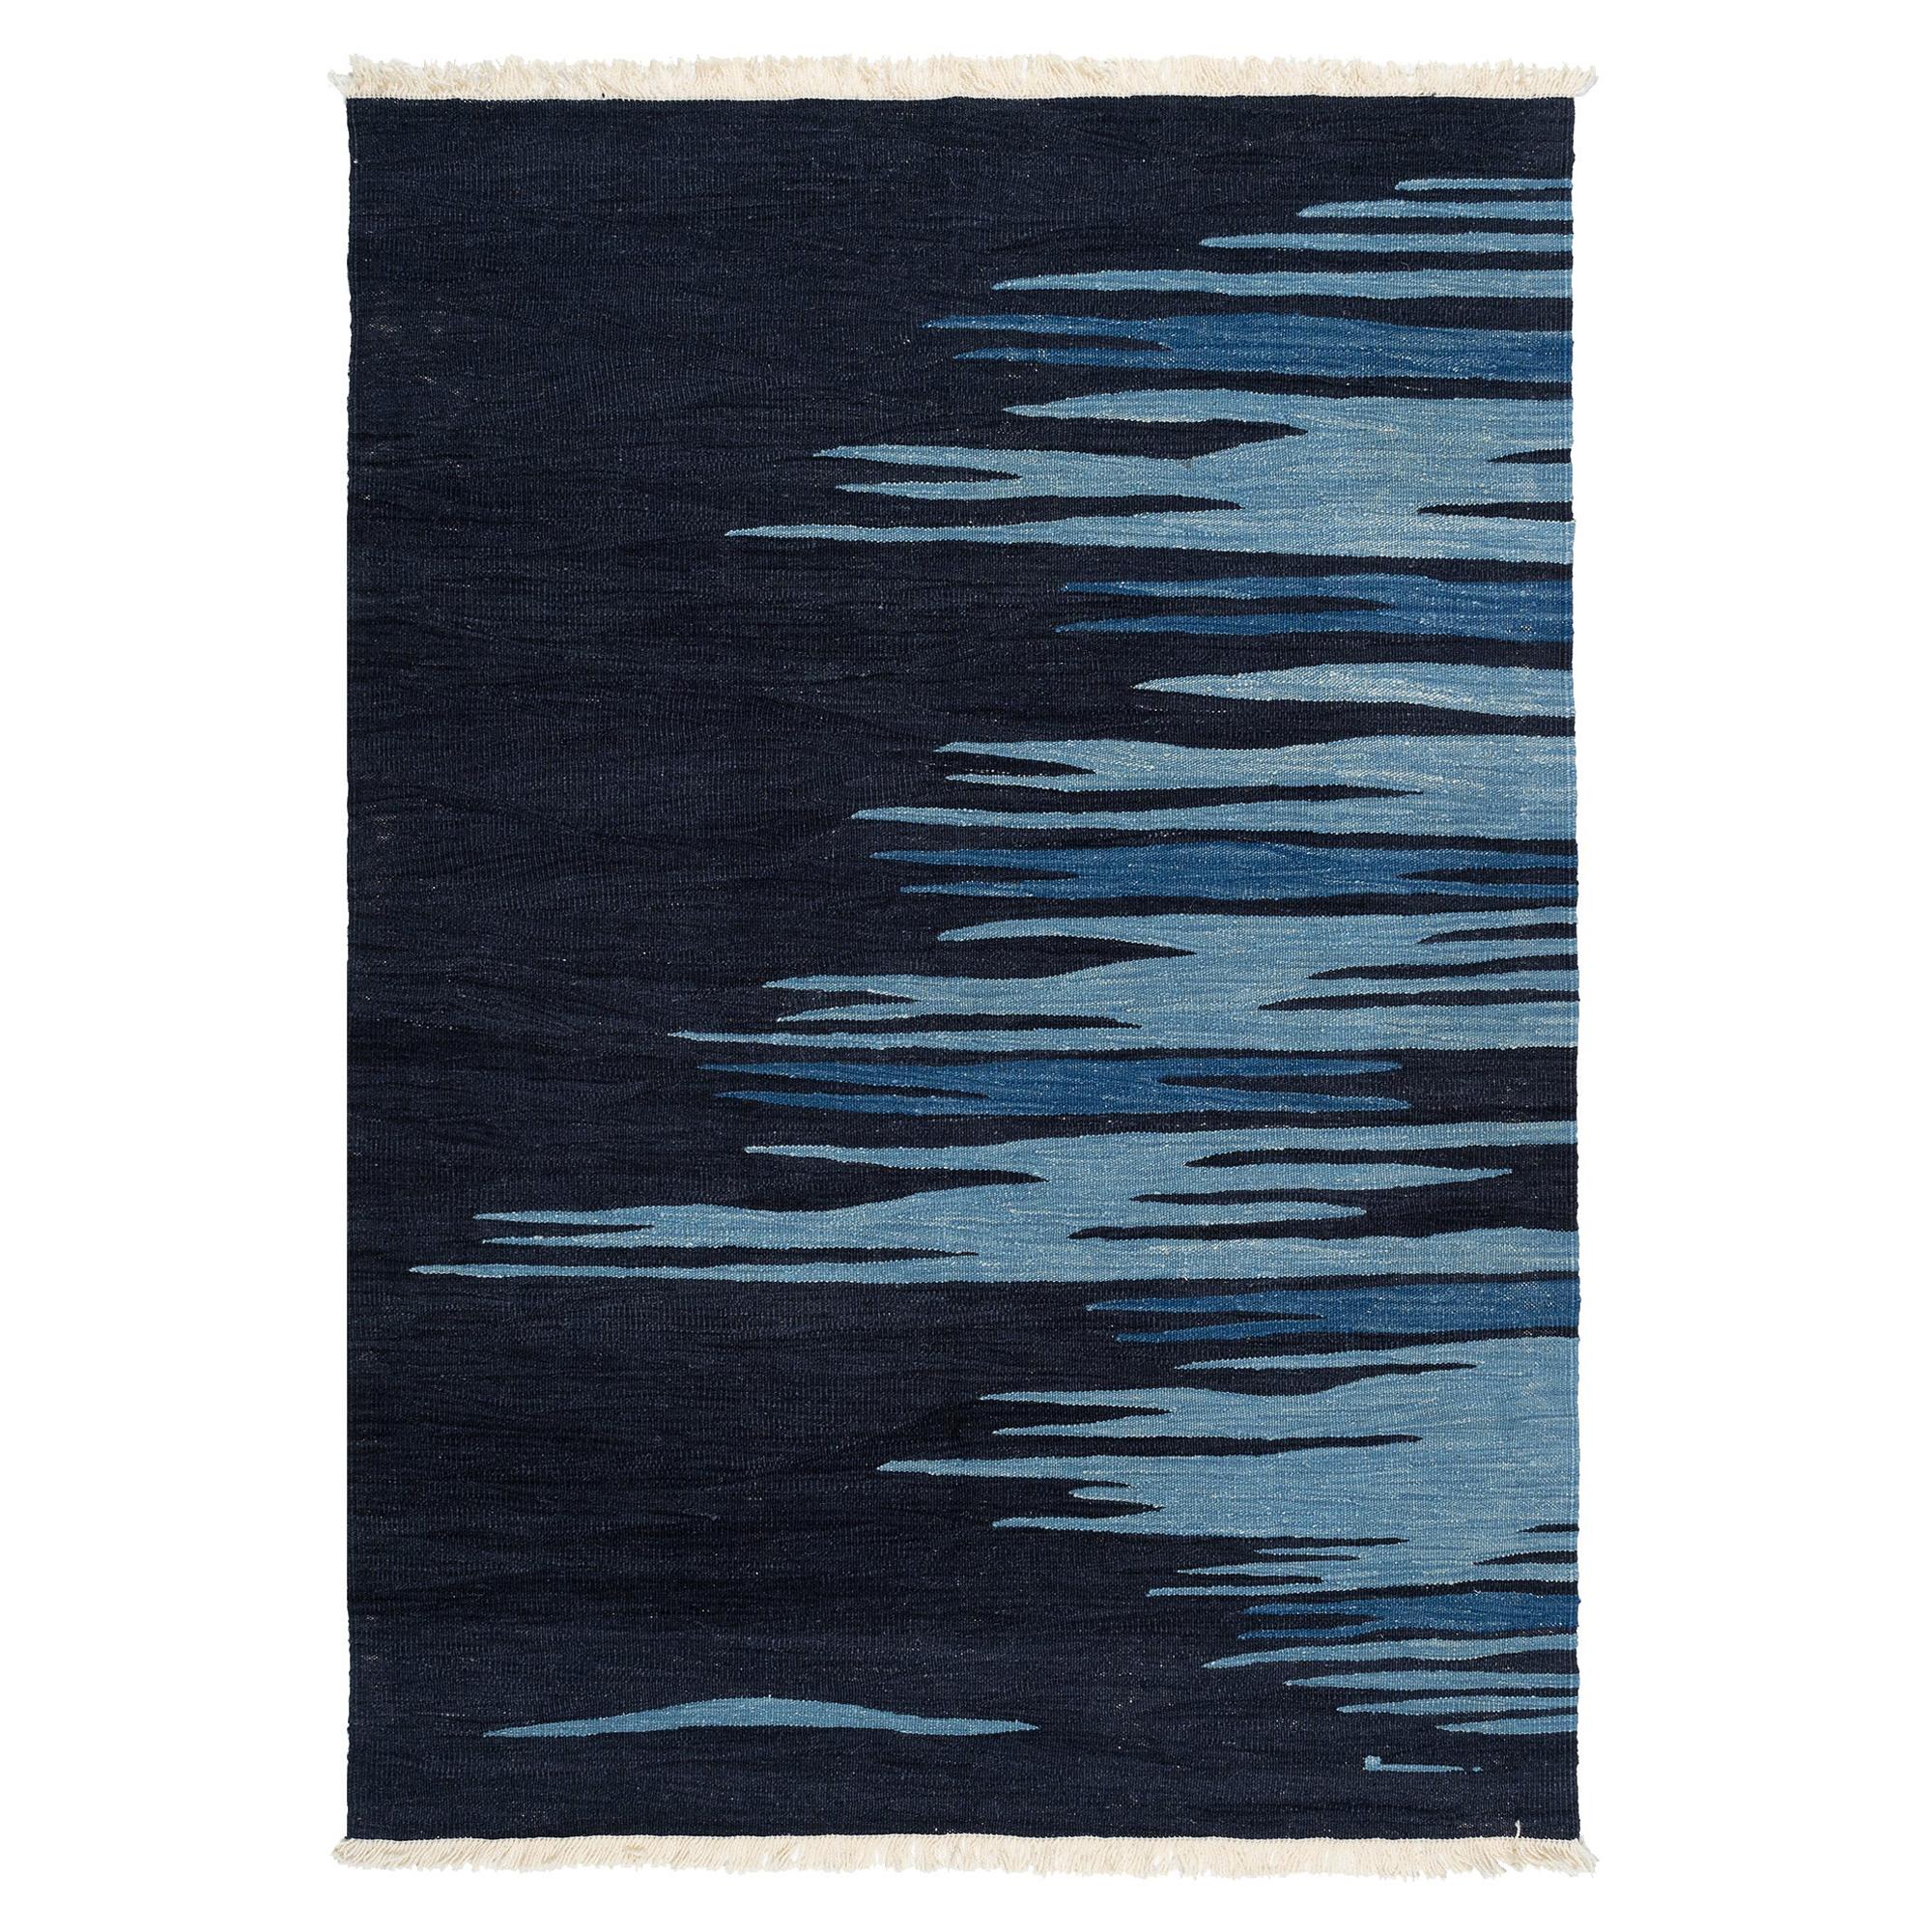 Ege No 2 Contemporary Modern Kilim Rug Wool Handwoven Midnight and Blue